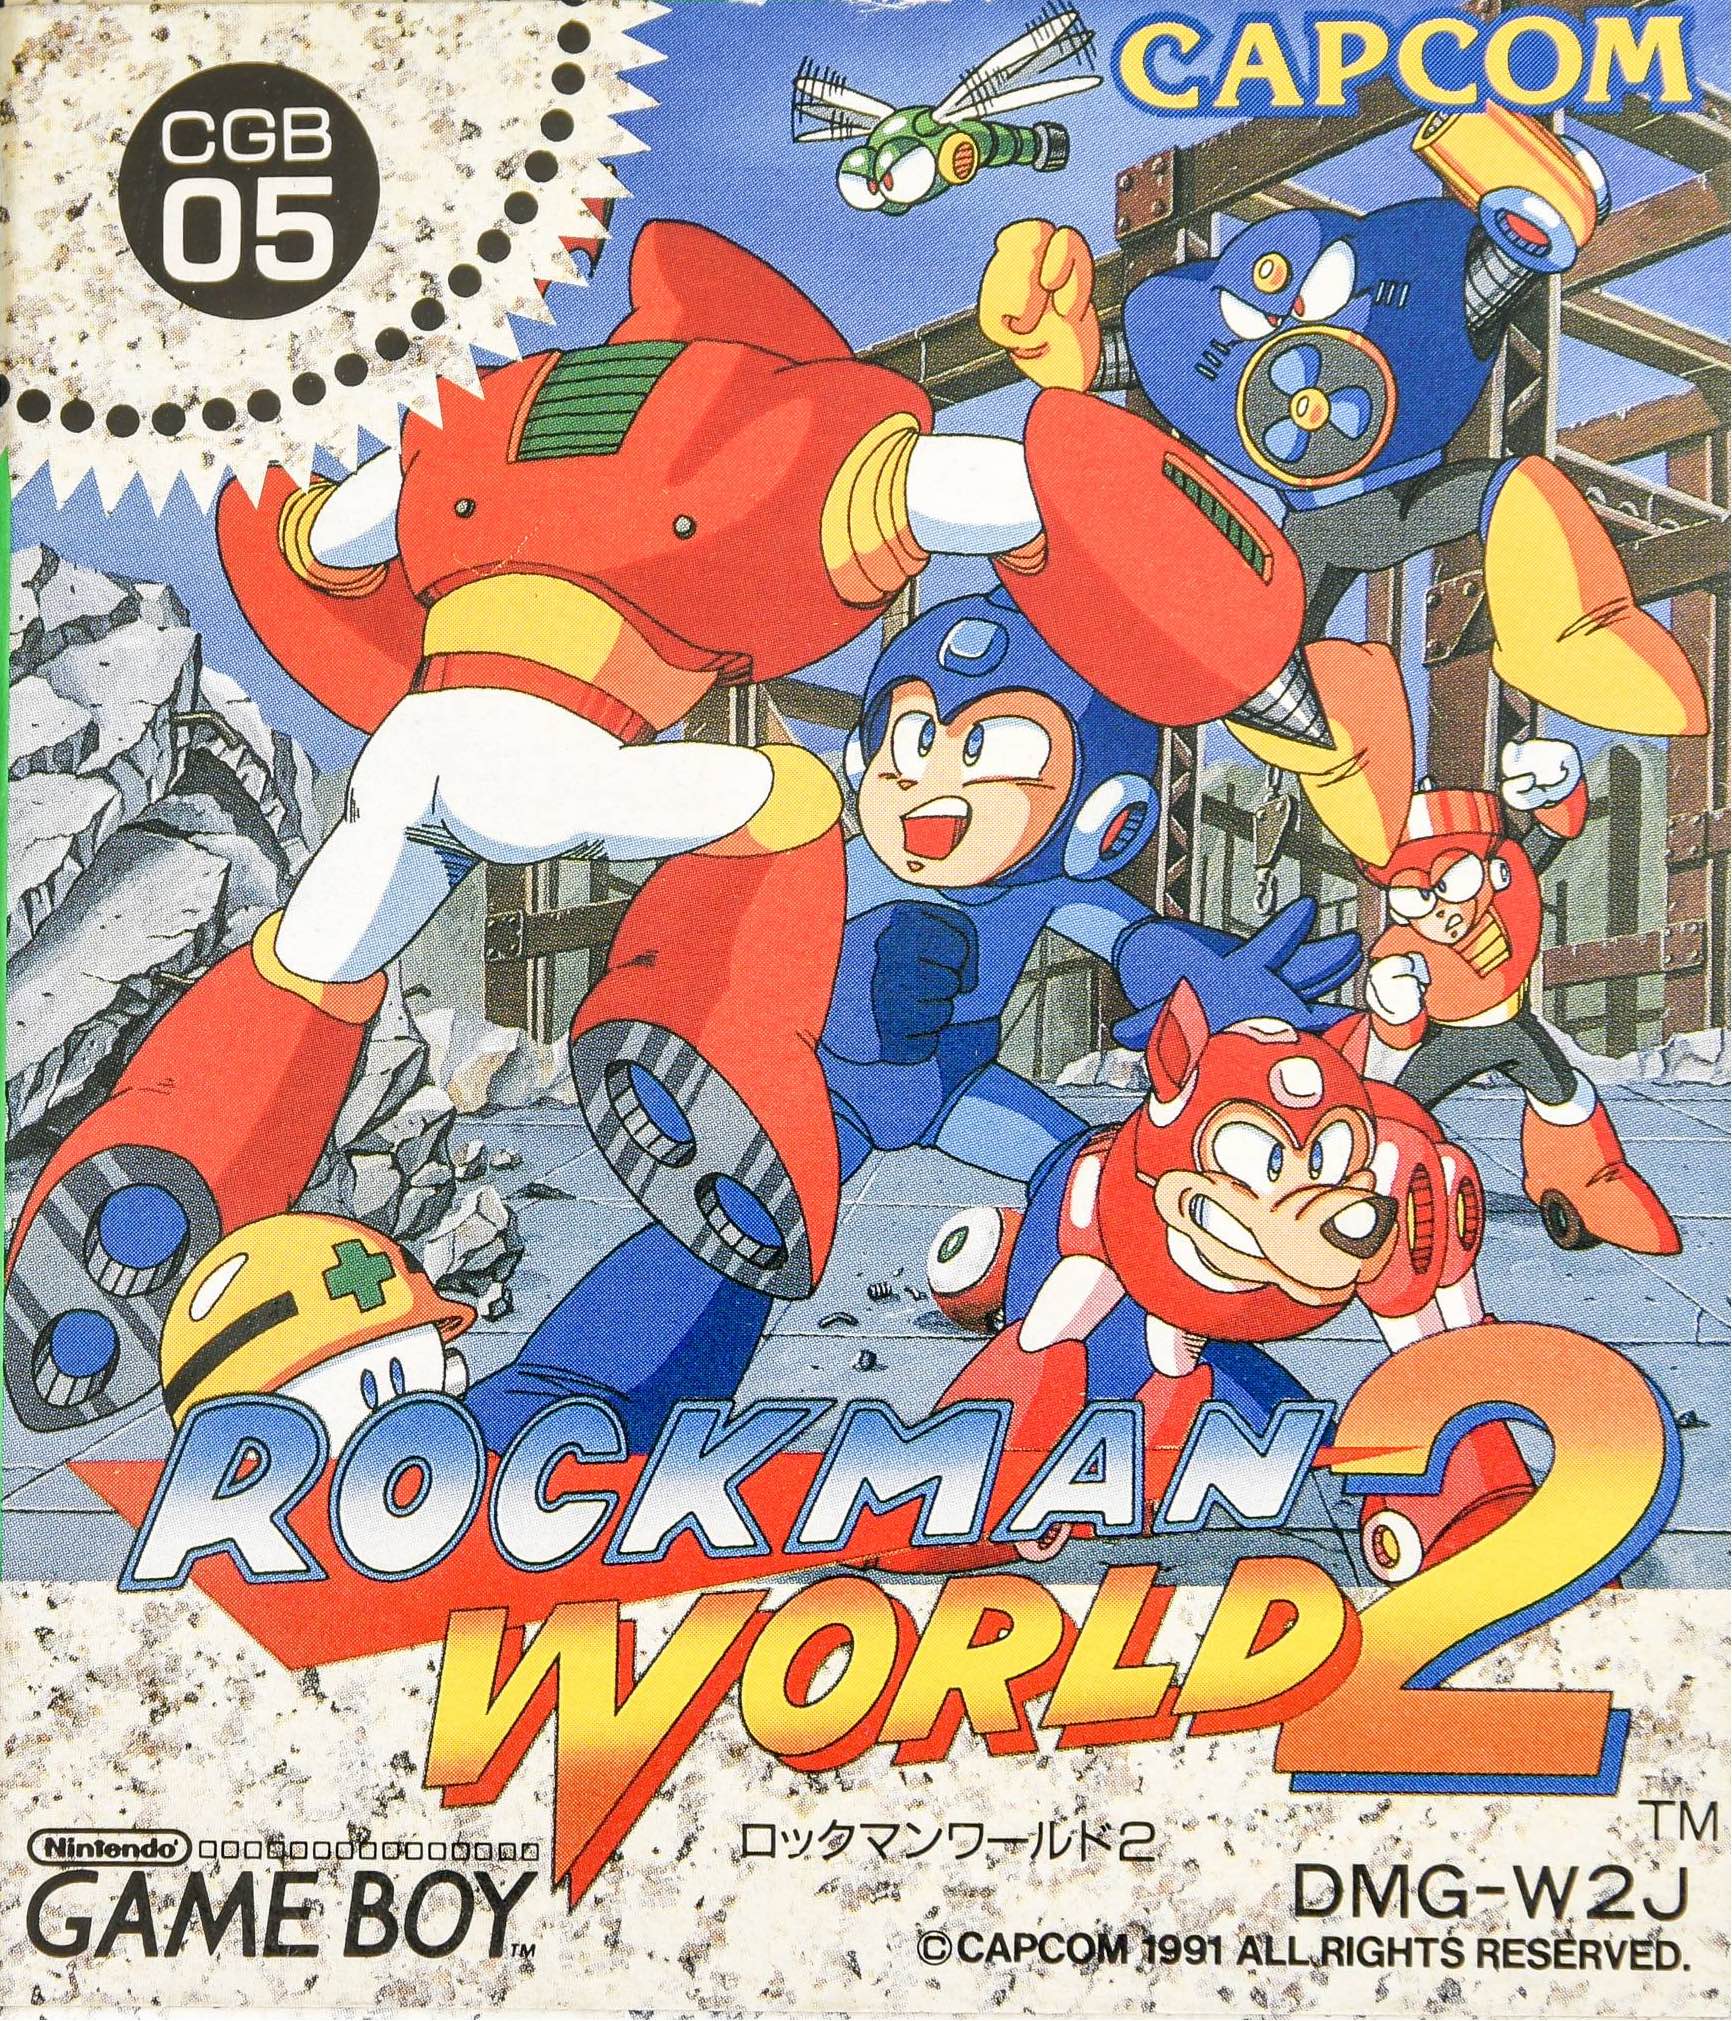 The Japanese had such lovely art on their Mega Man games.